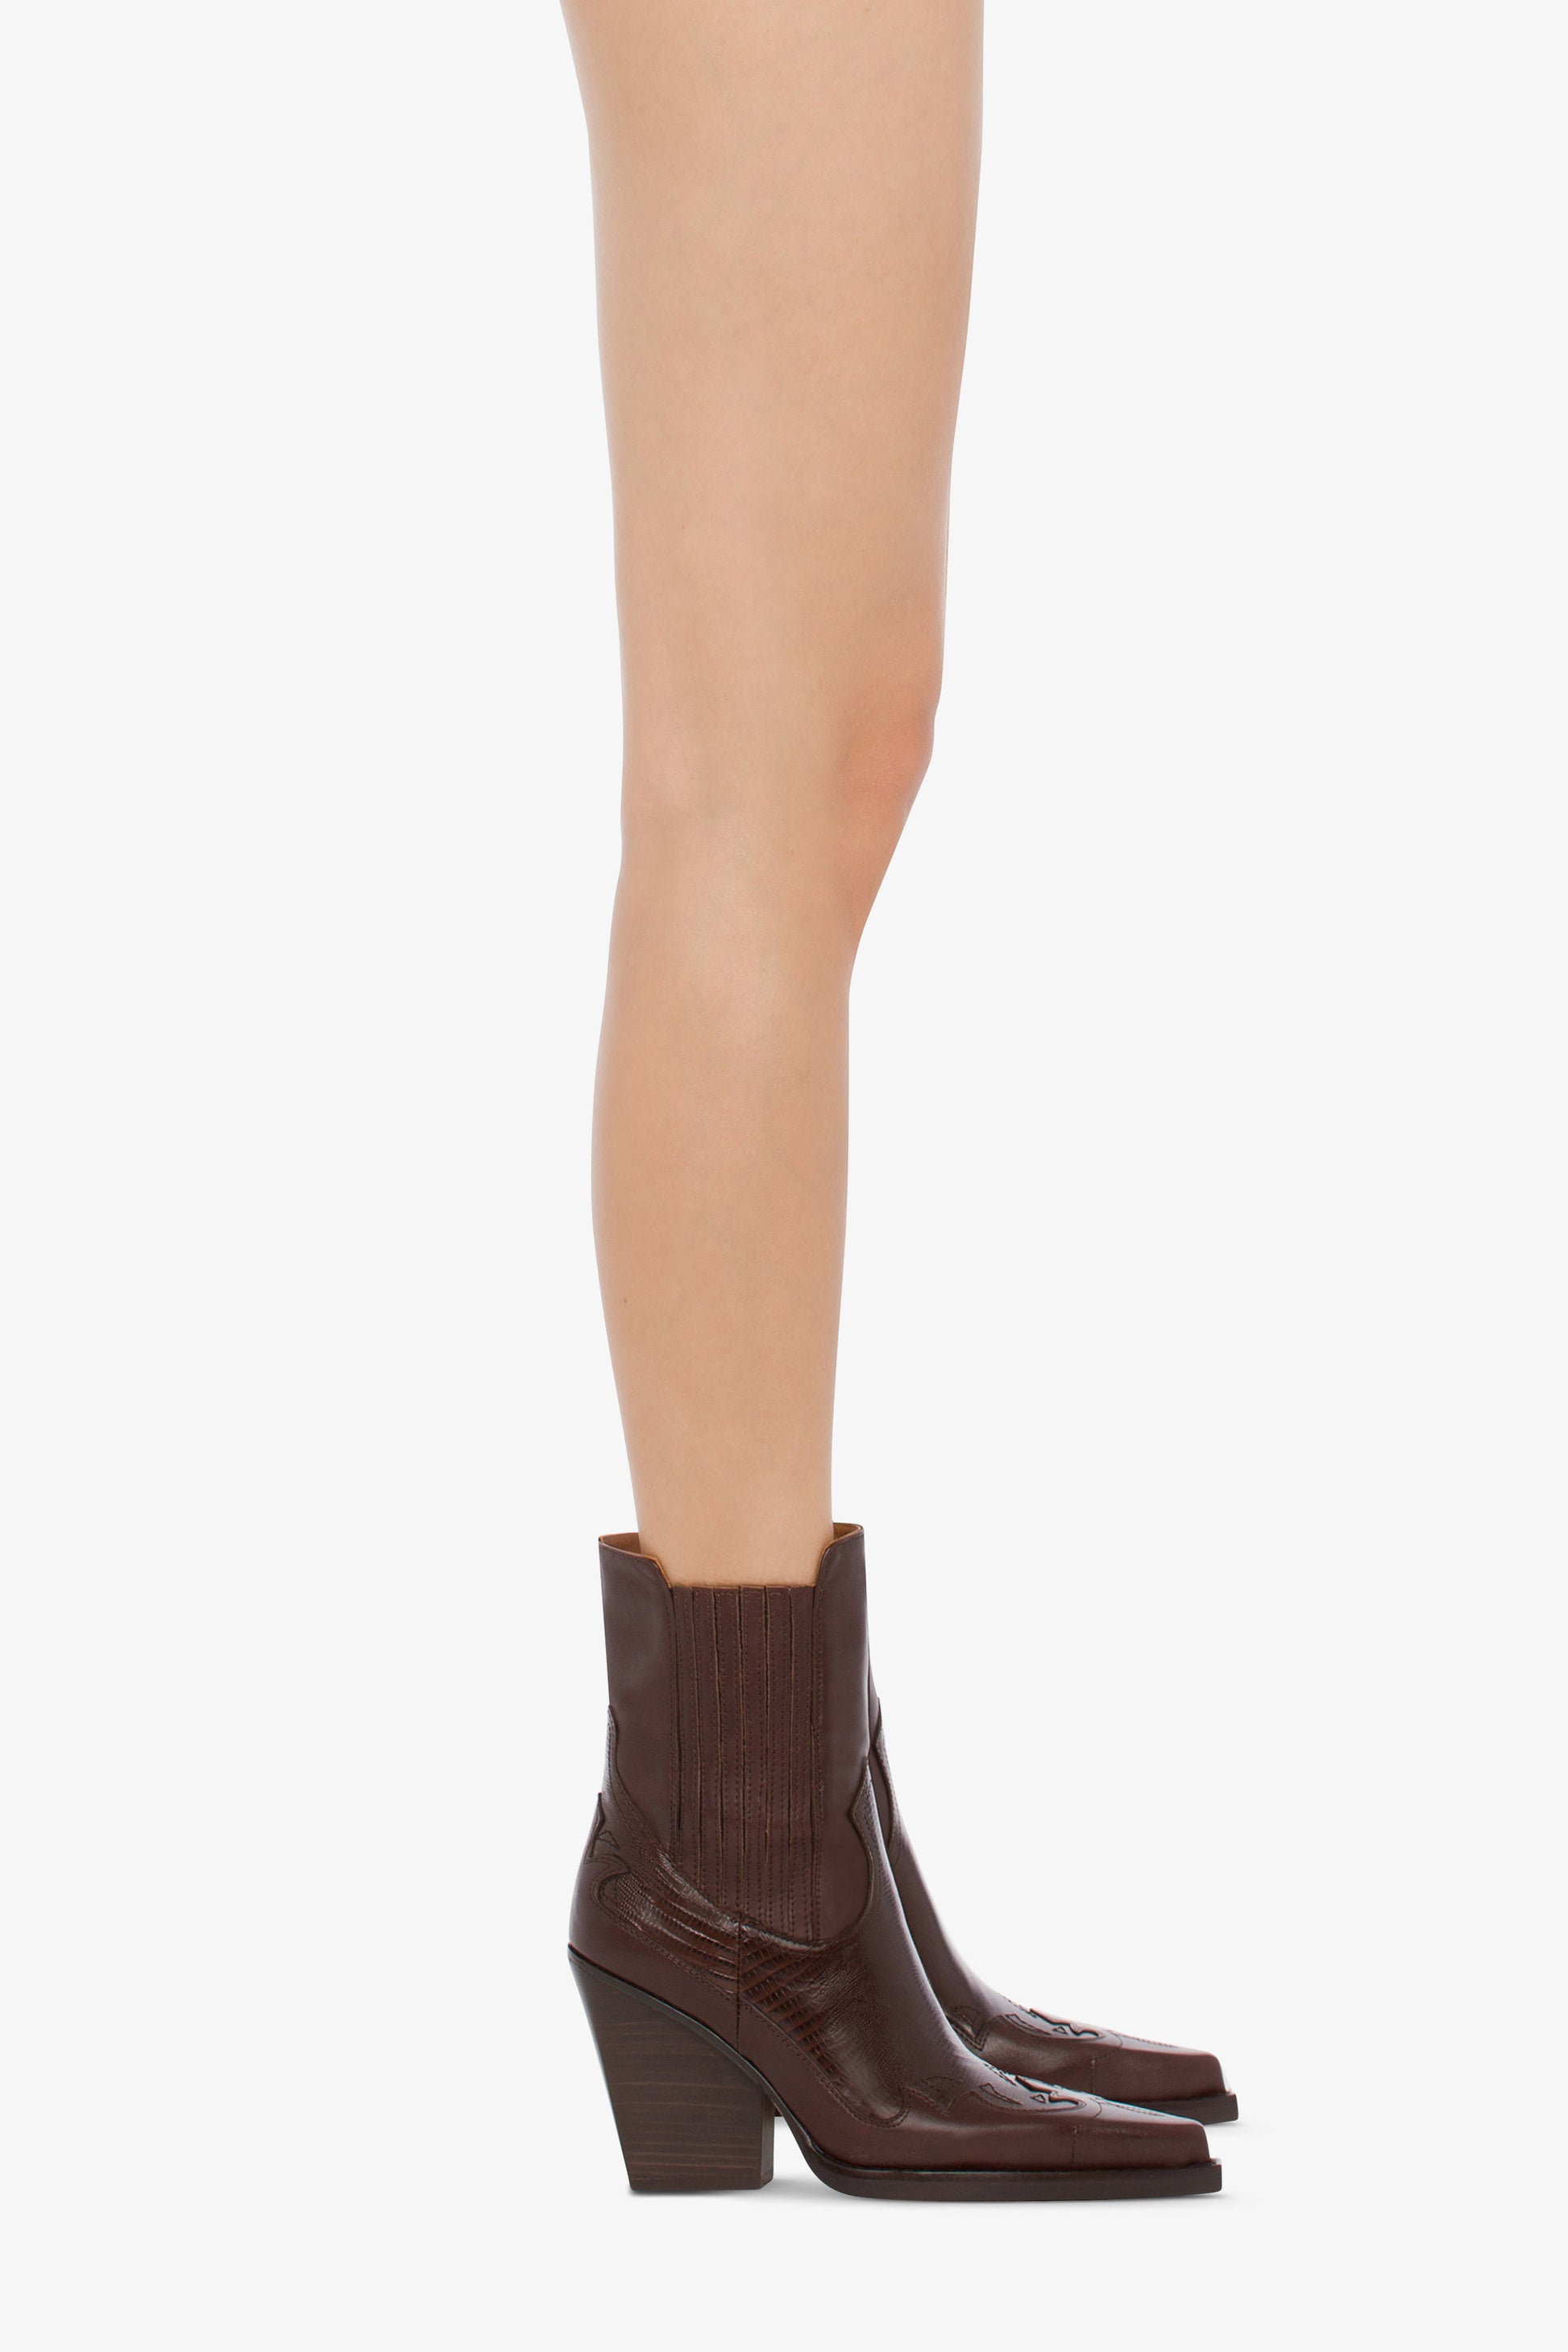 Pointed ankle boots in chocolate and mocha lizard-printed leather - Product worn